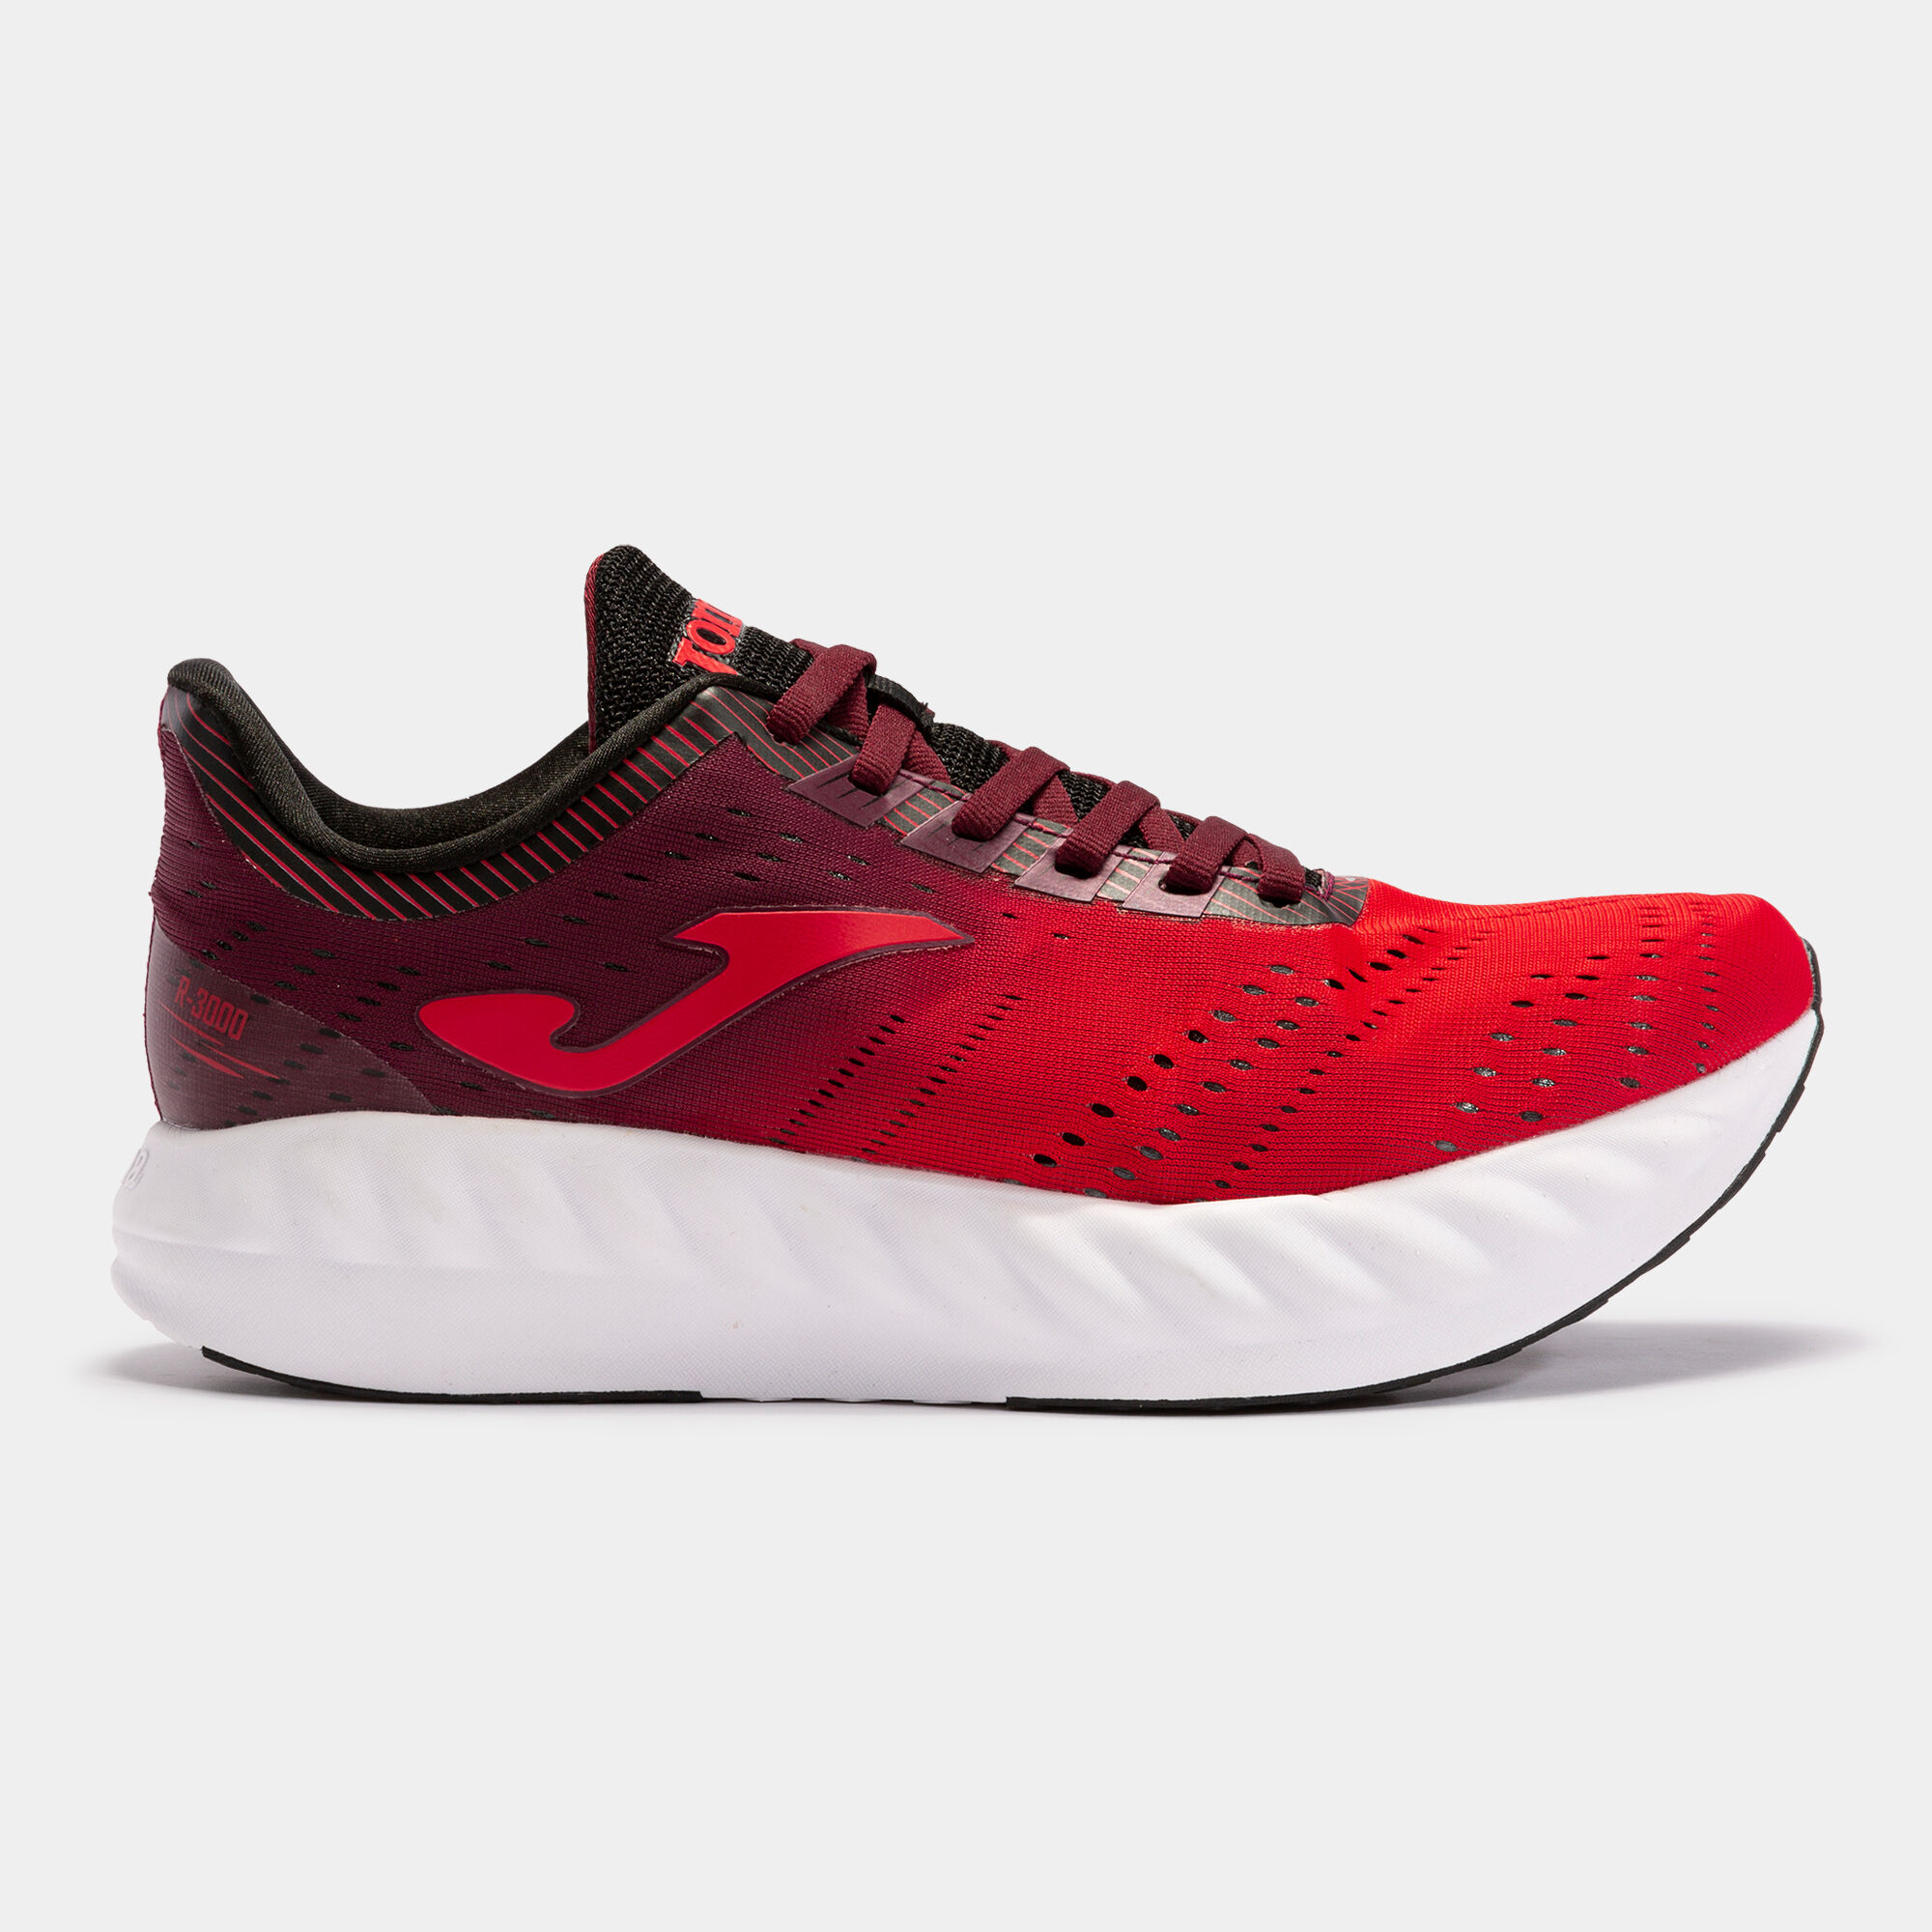 CHAUSSURES RUNNING R.3000 21 HOMME CORAIL BORDEAUX